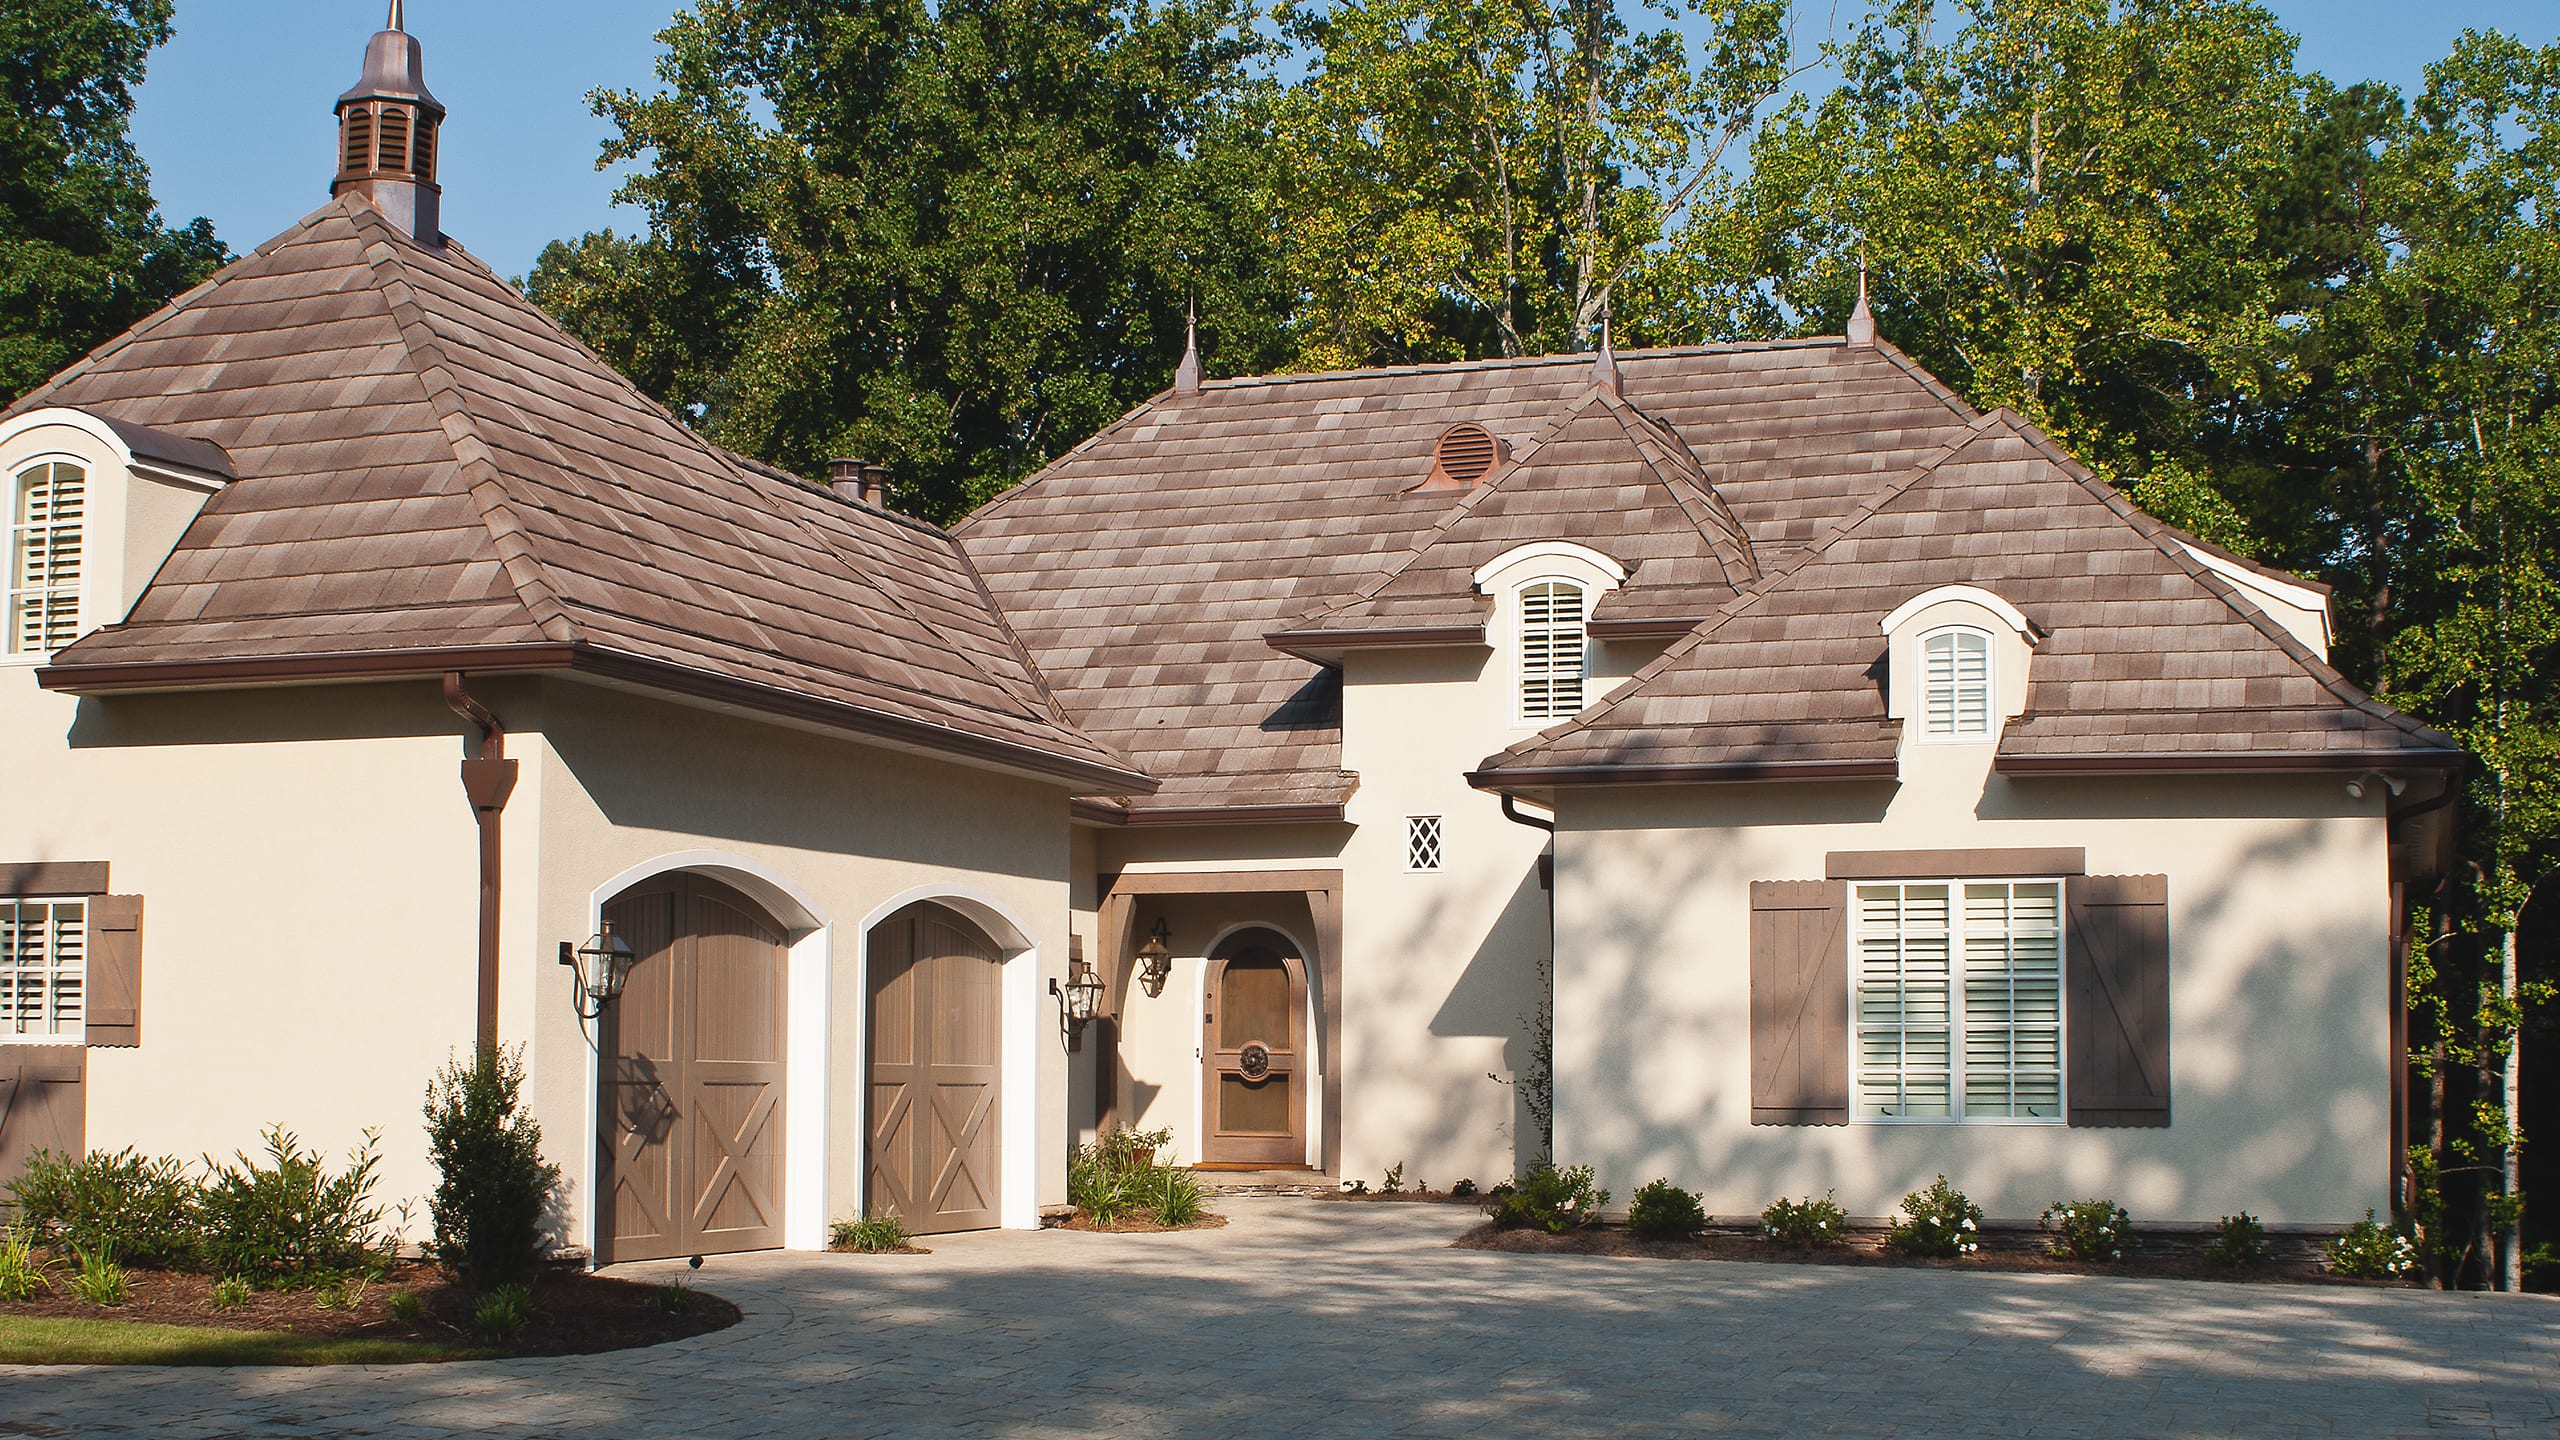 Private Residence - Martinsville Ludowici Roof Tile